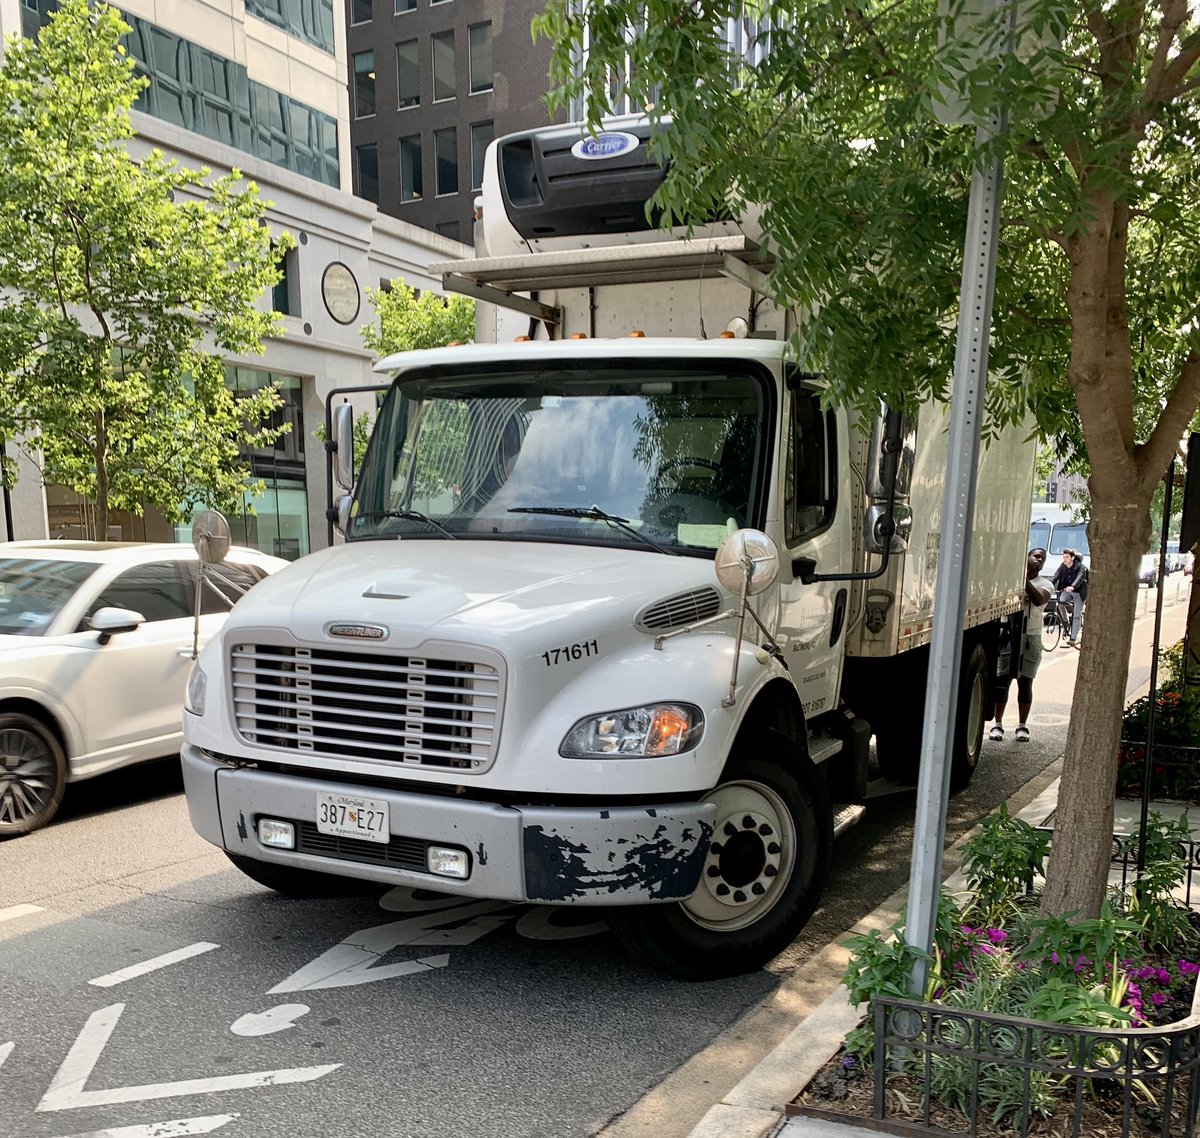 This @BacchusLtd truck was seen blocking the L St bike lane at 16th St last Friday during peak commute hours. The submitting cyclist states the driver refused to move despite several cyclists having to merge suddenly into traffic (as seen in the photo). #bikedc